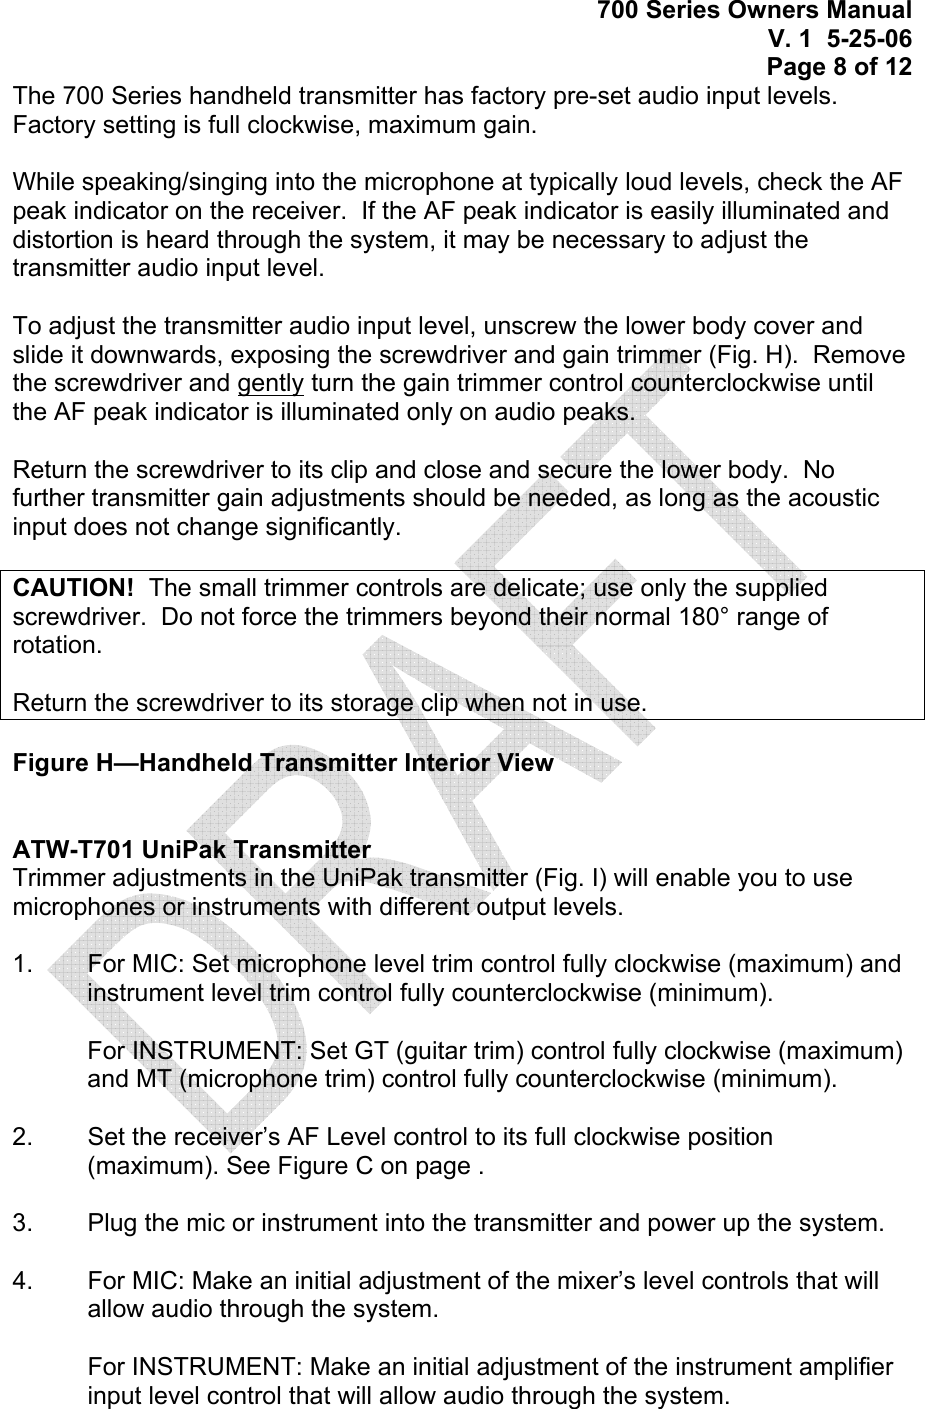 700 Series Owners Manual V. 1  5-25-06 Page 8 of 12 The 700 Series handheld transmitter has factory pre-set audio input levels.  Factory setting is full clockwise, maximum gain.    While speaking/singing into the microphone at typically loud levels, check the AF peak indicator on the receiver.  If the AF peak indicator is easily illuminated and distortion is heard through the system, it may be necessary to adjust the transmitter audio input level.    To adjust the transmitter audio input level, unscrew the lower body cover and slide it downwards, exposing the screwdriver and gain trimmer (Fig. H).  Remove the screwdriver and gently turn the gain trimmer control counterclockwise until the AF peak indicator is illuminated only on audio peaks.  Return the screwdriver to its clip and close and secure the lower body.  No further transmitter gain adjustments should be needed, as long as the acoustic input does not change significantly.  CAUTION!  The small trimmer controls are delicate; use only the supplied screwdriver.  Do not force the trimmers beyond their normal 180° range of rotation.  Return the screwdriver to its storage clip when not in use.  Figure H—Handheld Transmitter Interior View   ATW-T701 UniPak Transmitter Trimmer adjustments in the UniPak transmitter (Fig. I) will enable you to use microphones or instruments with different output levels.  1.   For MIC: Set microphone level trim control fully clockwise (maximum) and instrument level trim control fully counterclockwise (minimum).  For INSTRUMENT: Set GT (guitar trim) control fully clockwise (maximum) and MT (microphone trim) control fully counterclockwise (minimum).  2.    Set the receiver’s AF Level control to its full clockwise position (maximum). See Figure C on page .  3.   Plug the mic or instrument into the transmitter and power up the system.  4.   For MIC: Make an initial adjustment of the mixer’s level controls that will allow audio through the system.  For INSTRUMENT: Make an initial adjustment of the instrument amplifier input level control that will allow audio through the system.  